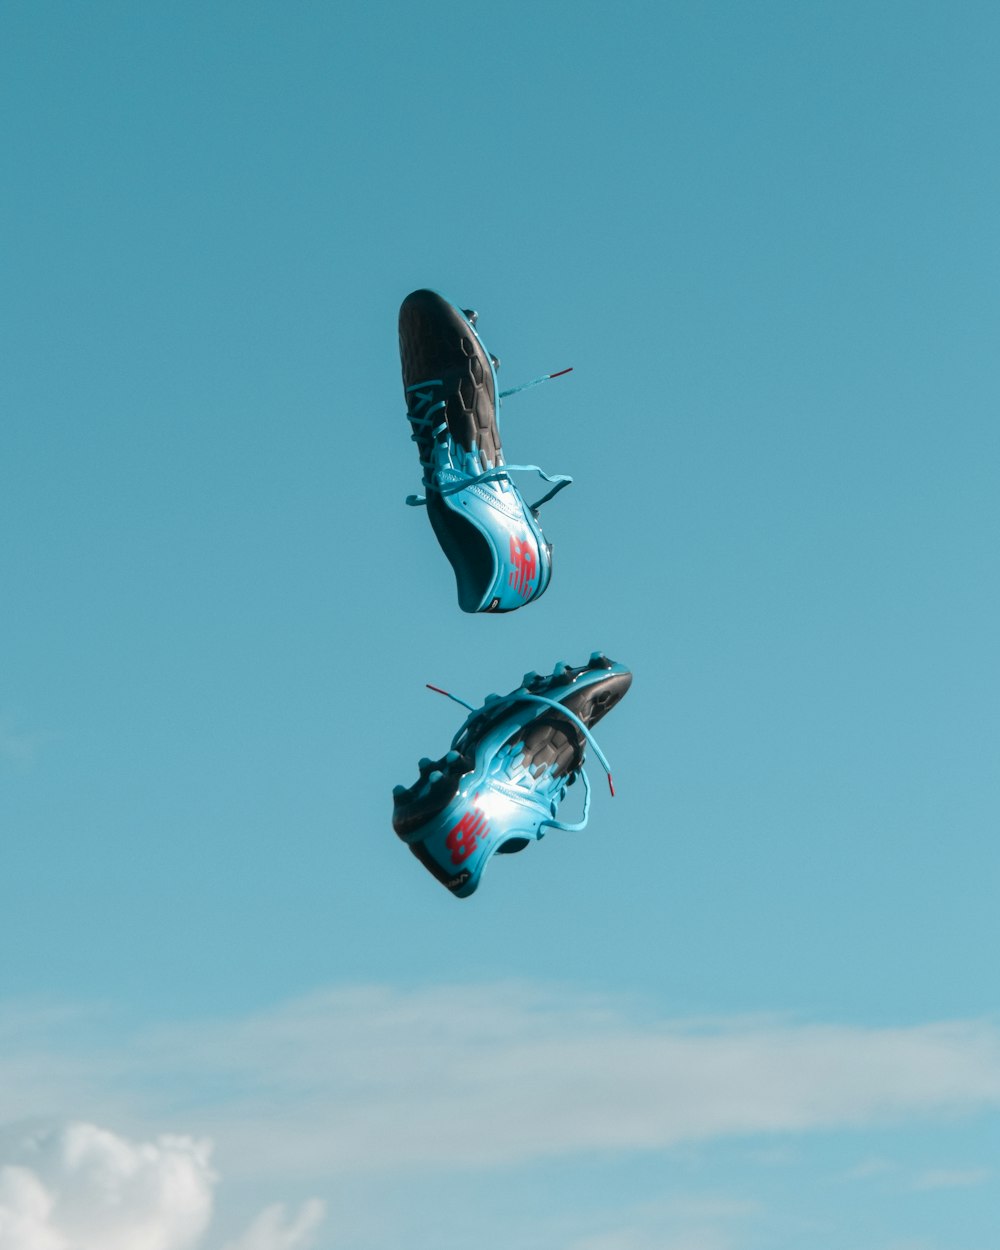 pair of blue-and-black New Balance cleats in the air under teal sky with white clouds